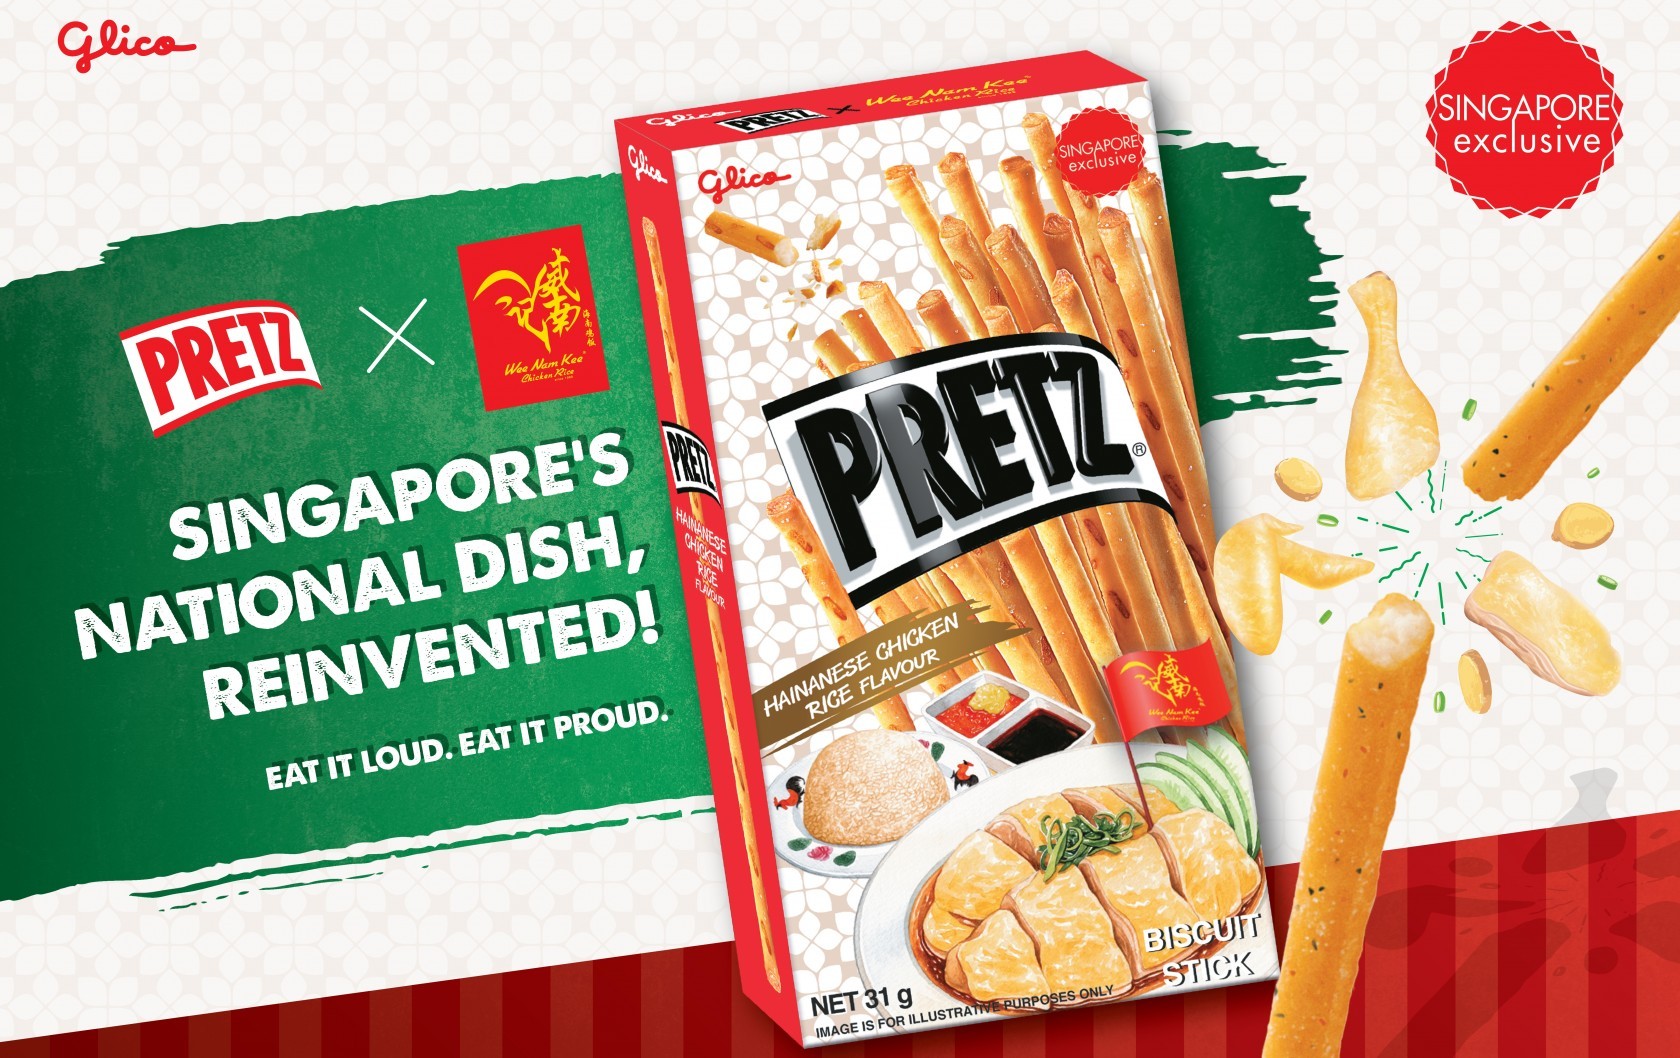 PRETZ, Chicken Rice, Hainanese Chicken Rice, Singapore, Glico, Wee Nam Kee, Limited Edition, Singapore Food Festival (SFF)